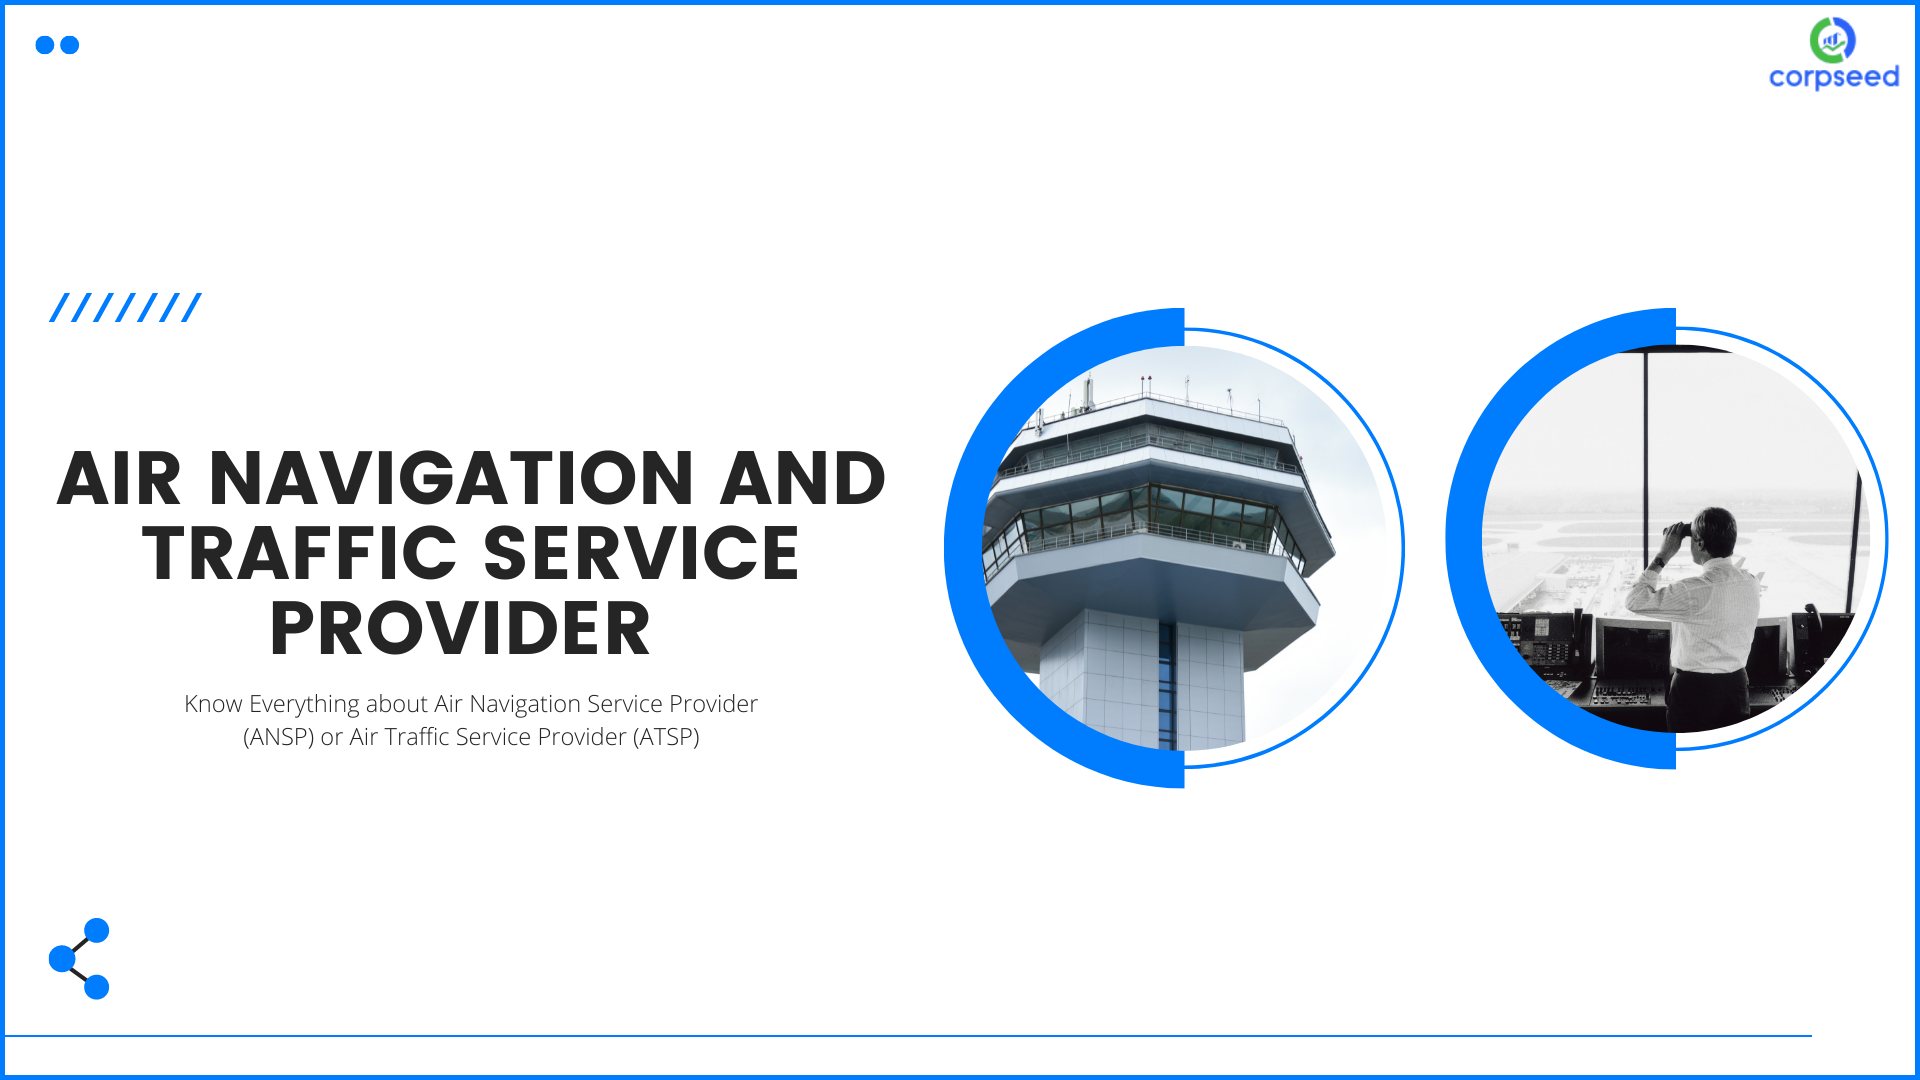 Air_Navigation_Service_Provider_(ANSP)_or_Air_Traffic_Service_Provider_(ATSP)-corpseed.png